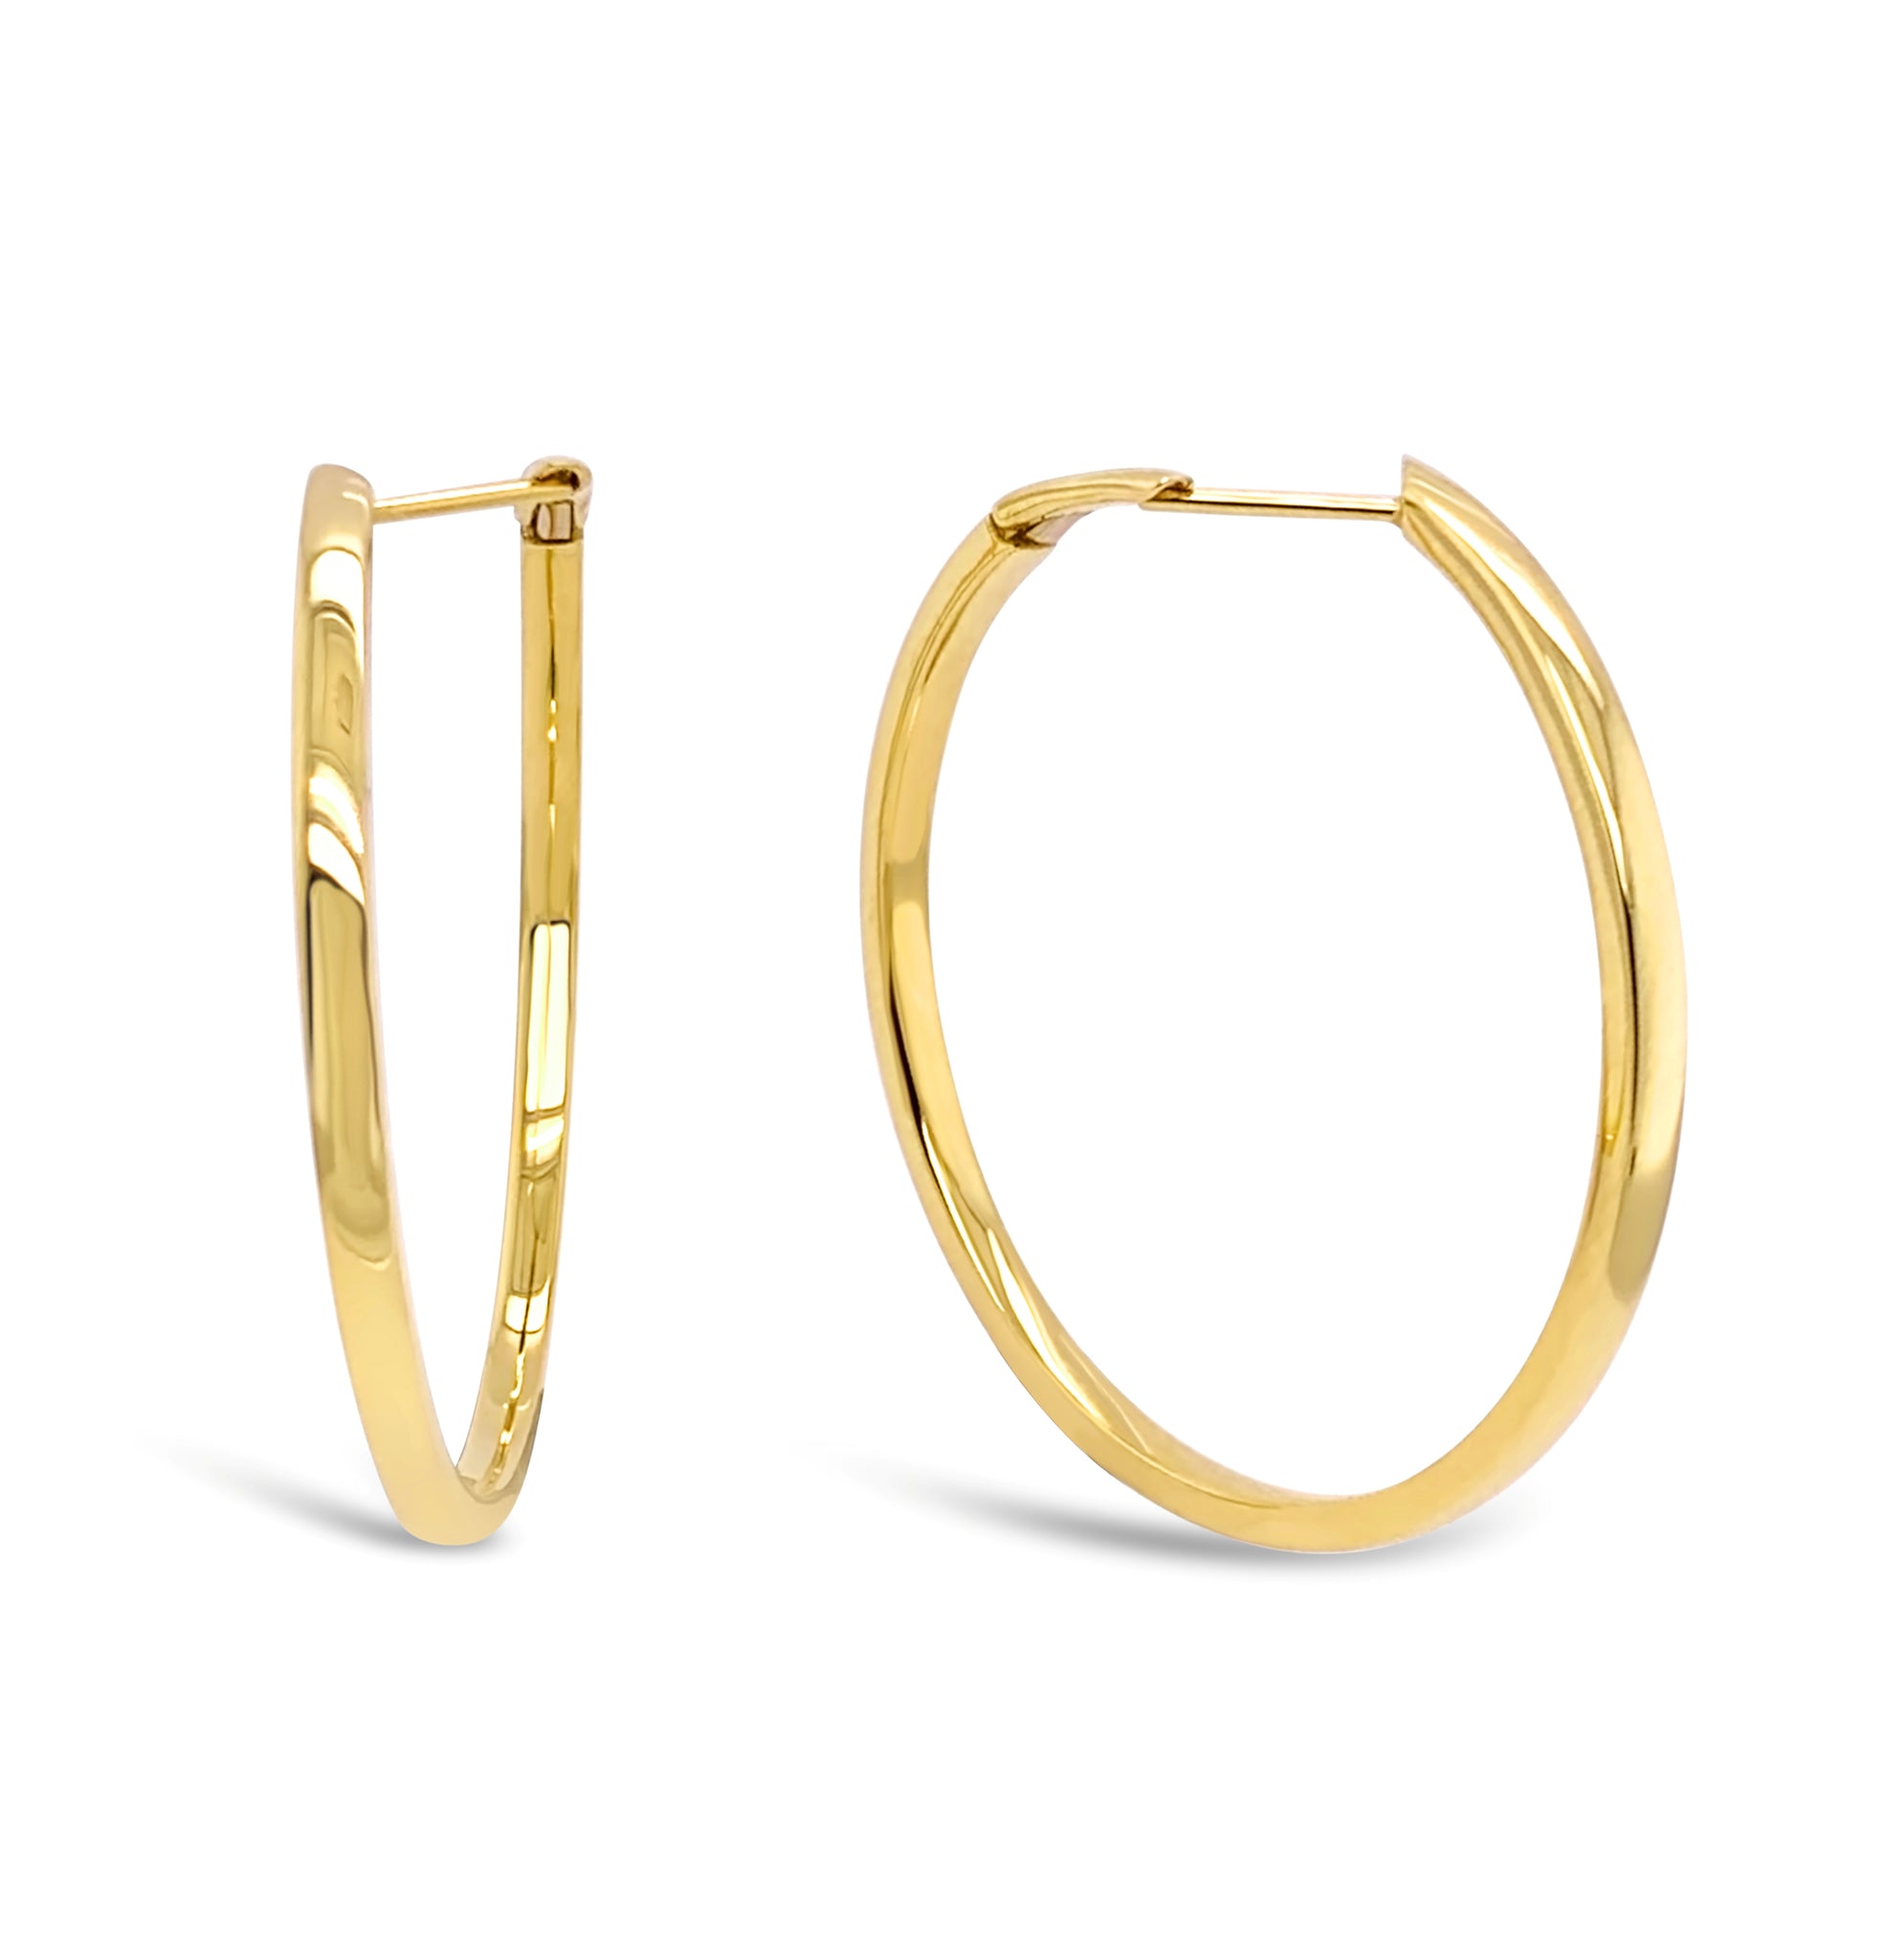 Gold Round Hoop Earrings Small